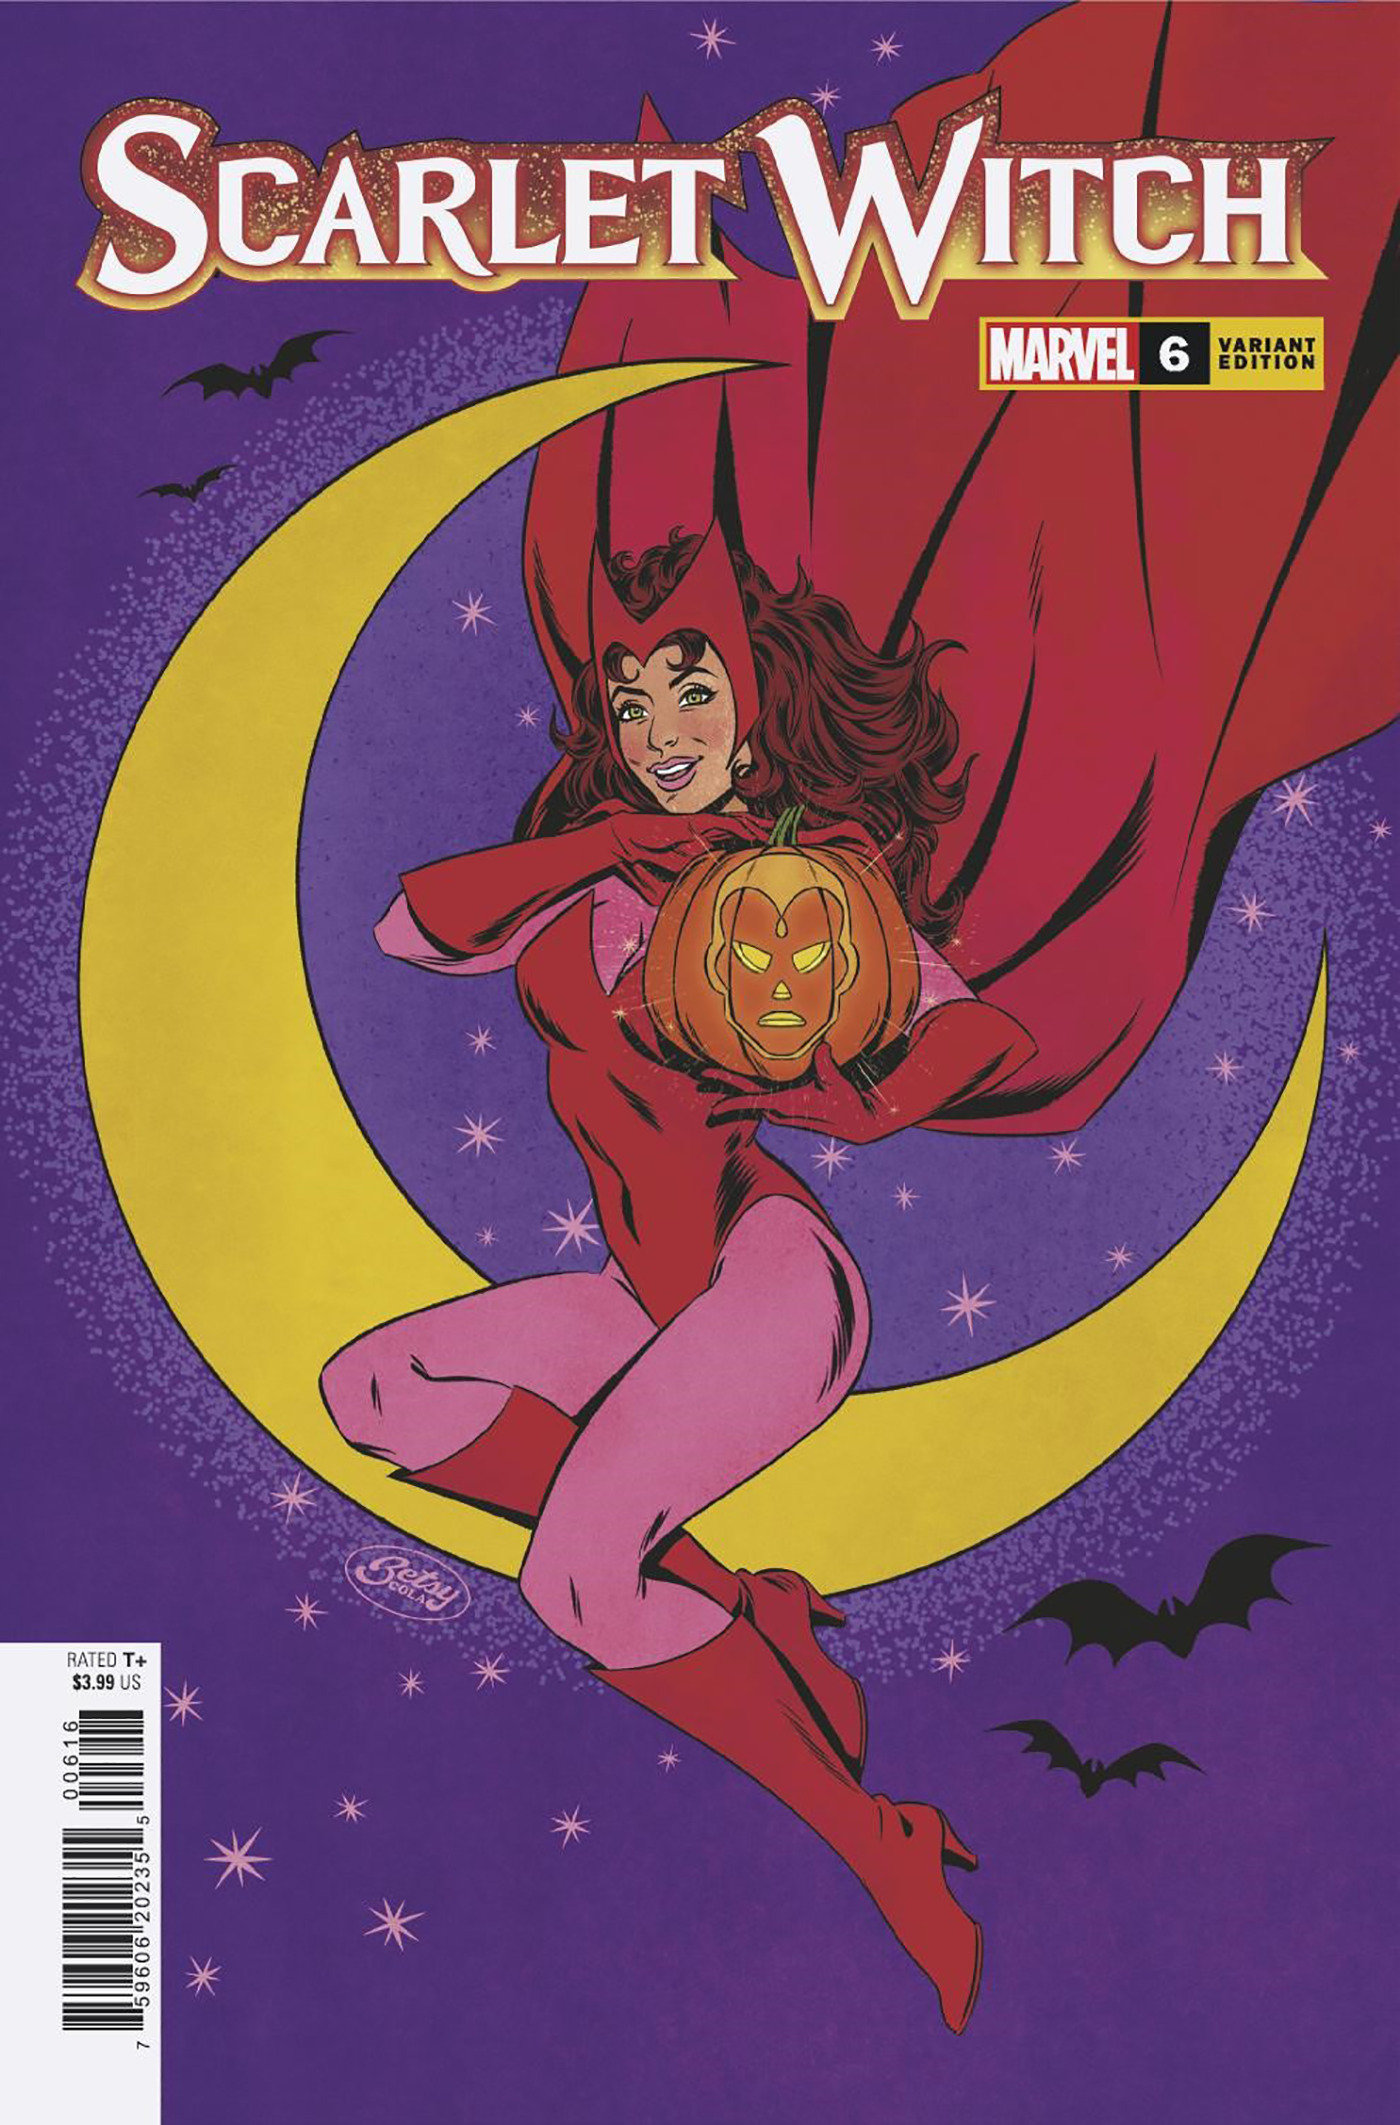 Scarlet Witch #6 Betsy Cola 1 for 25 Incentive Variant